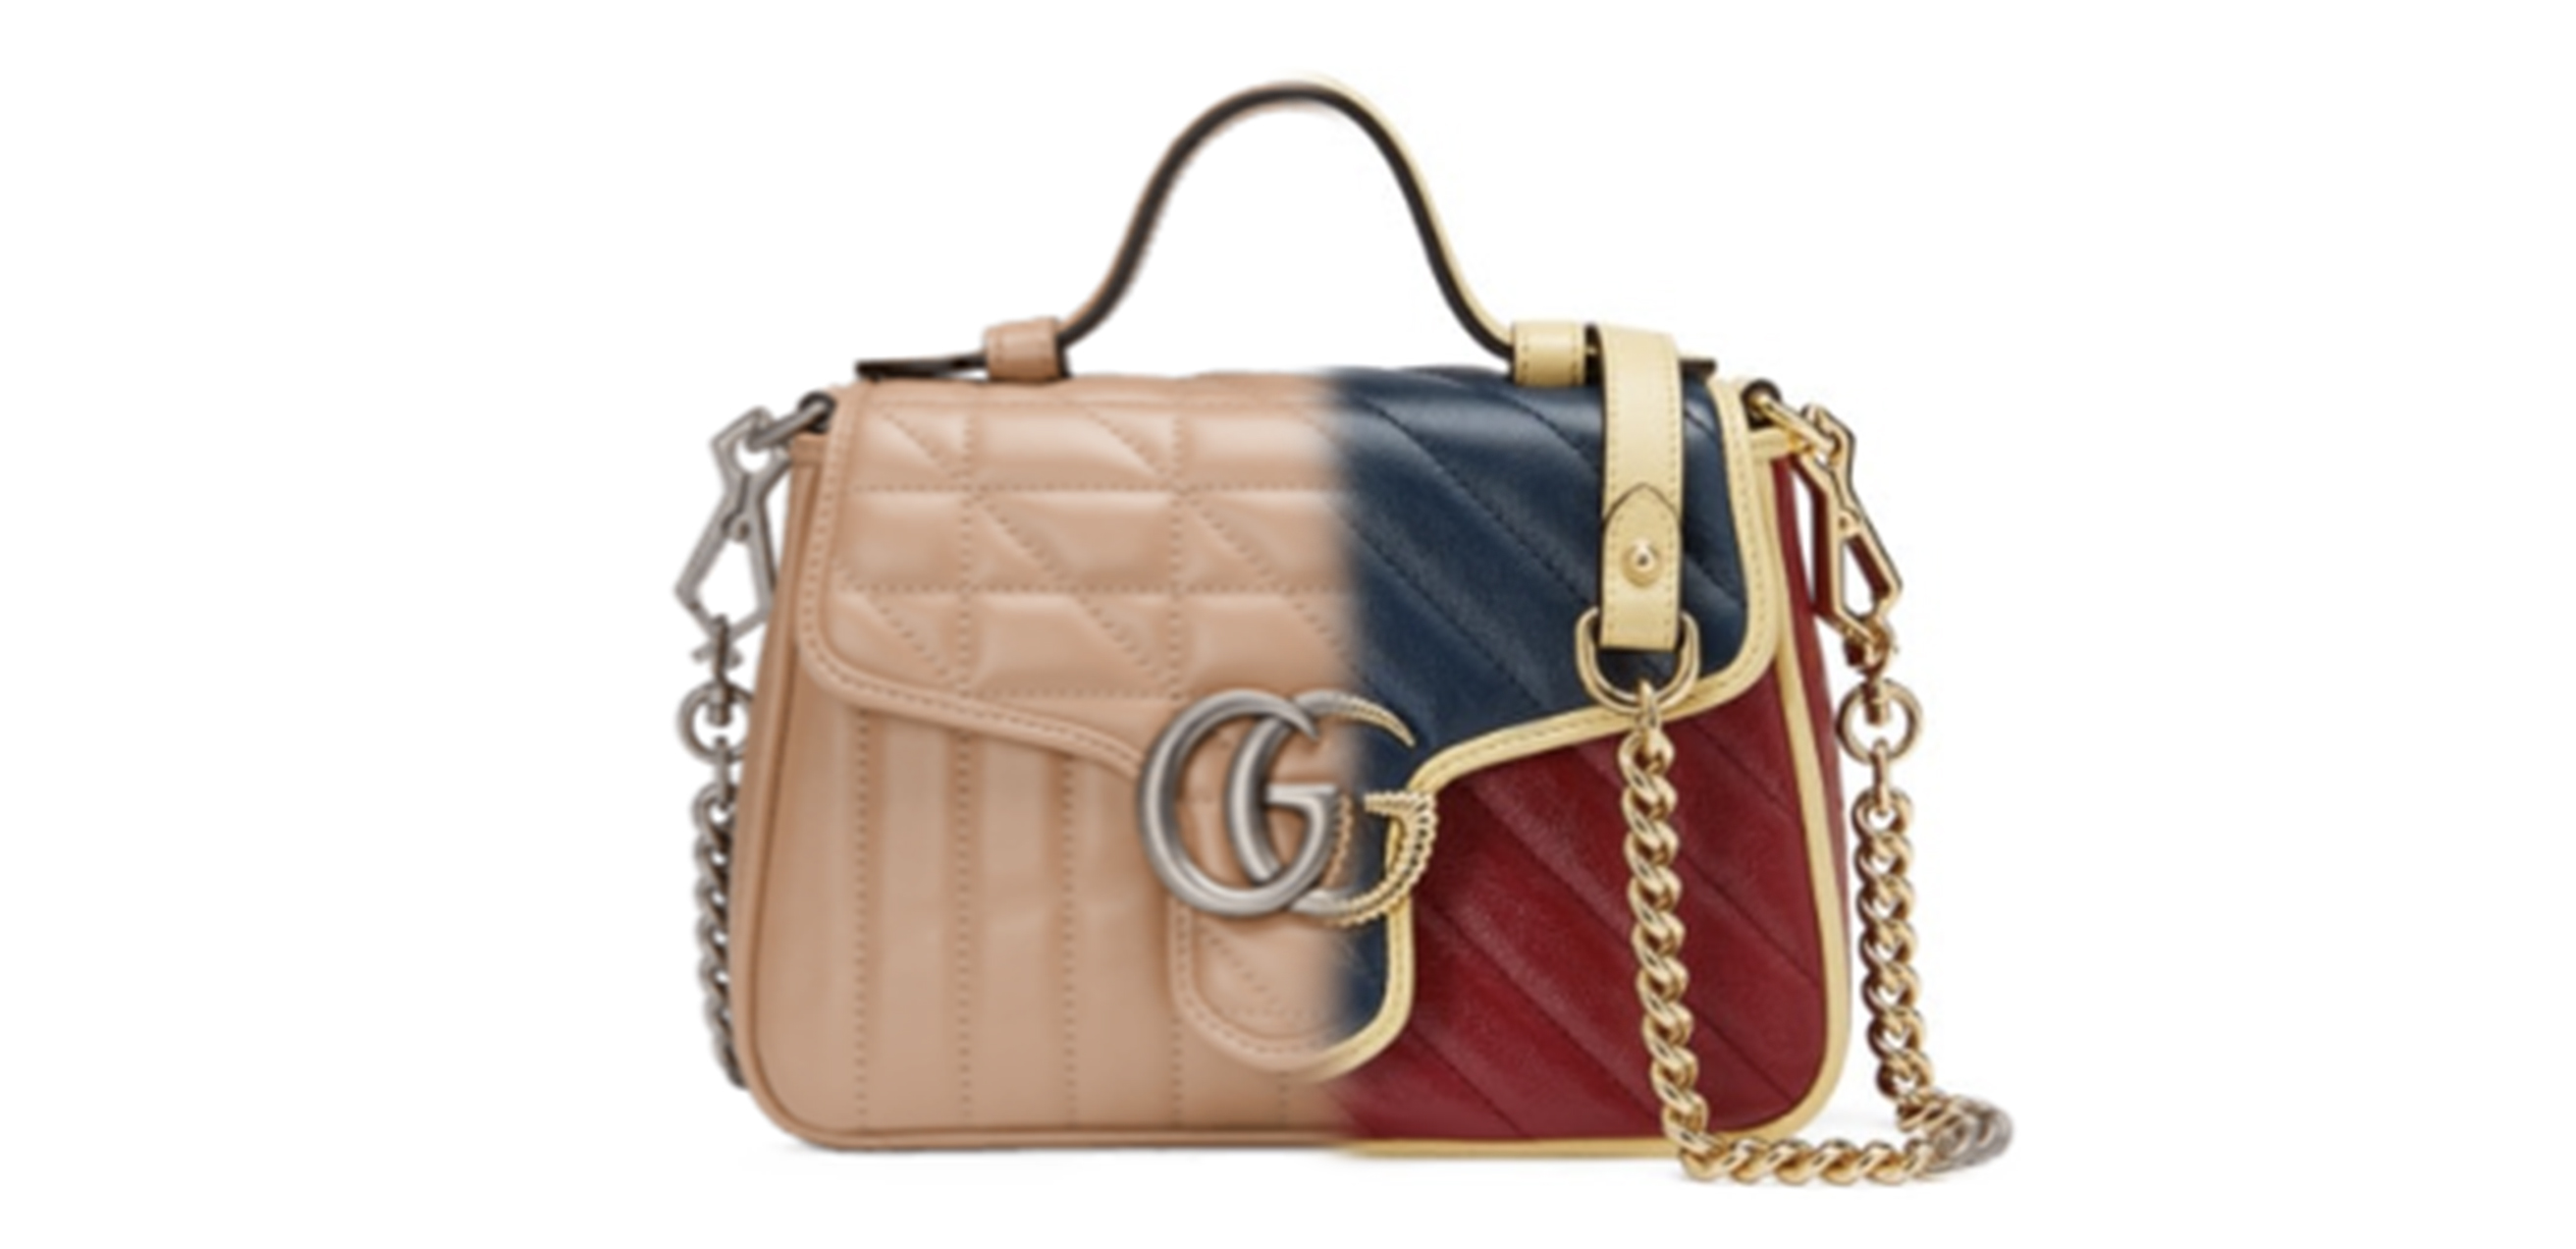 Ultimate Bag Guide: Gucci Marmont | The Handbag Clinic